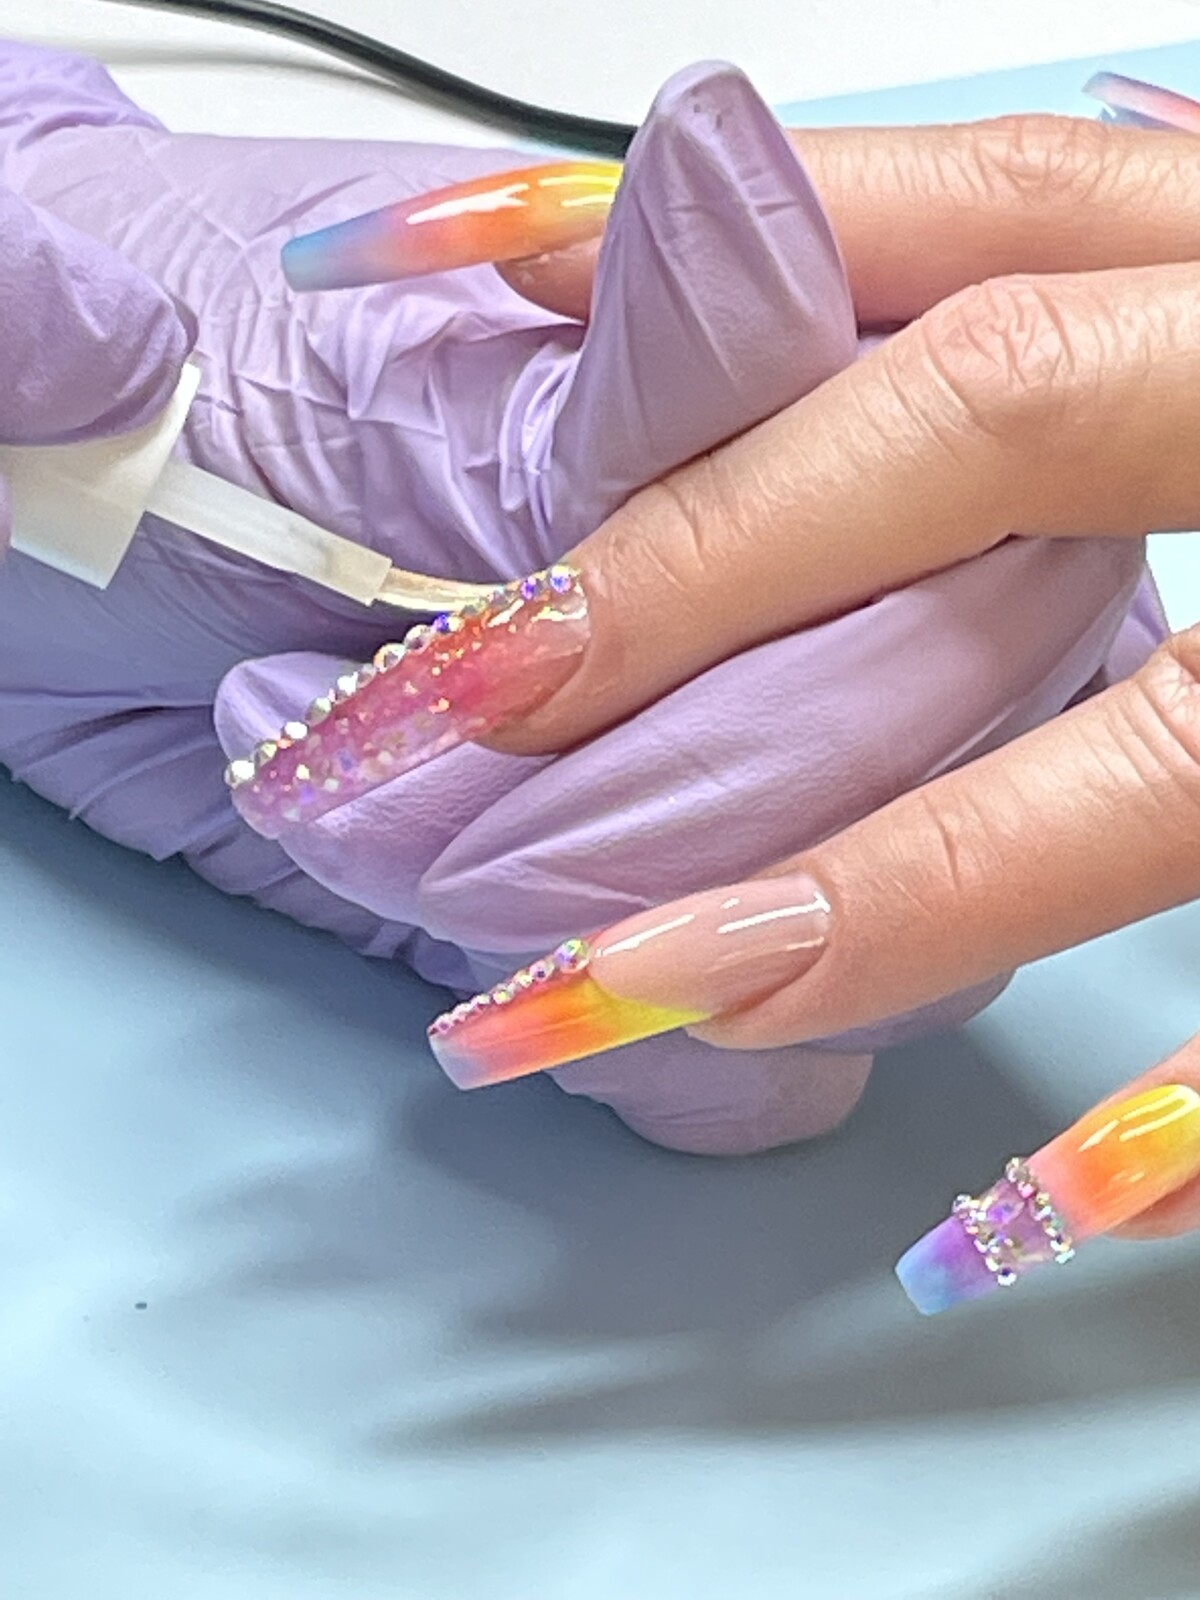 Become a Certified Nail Technician – Course Details, Fee & Scope